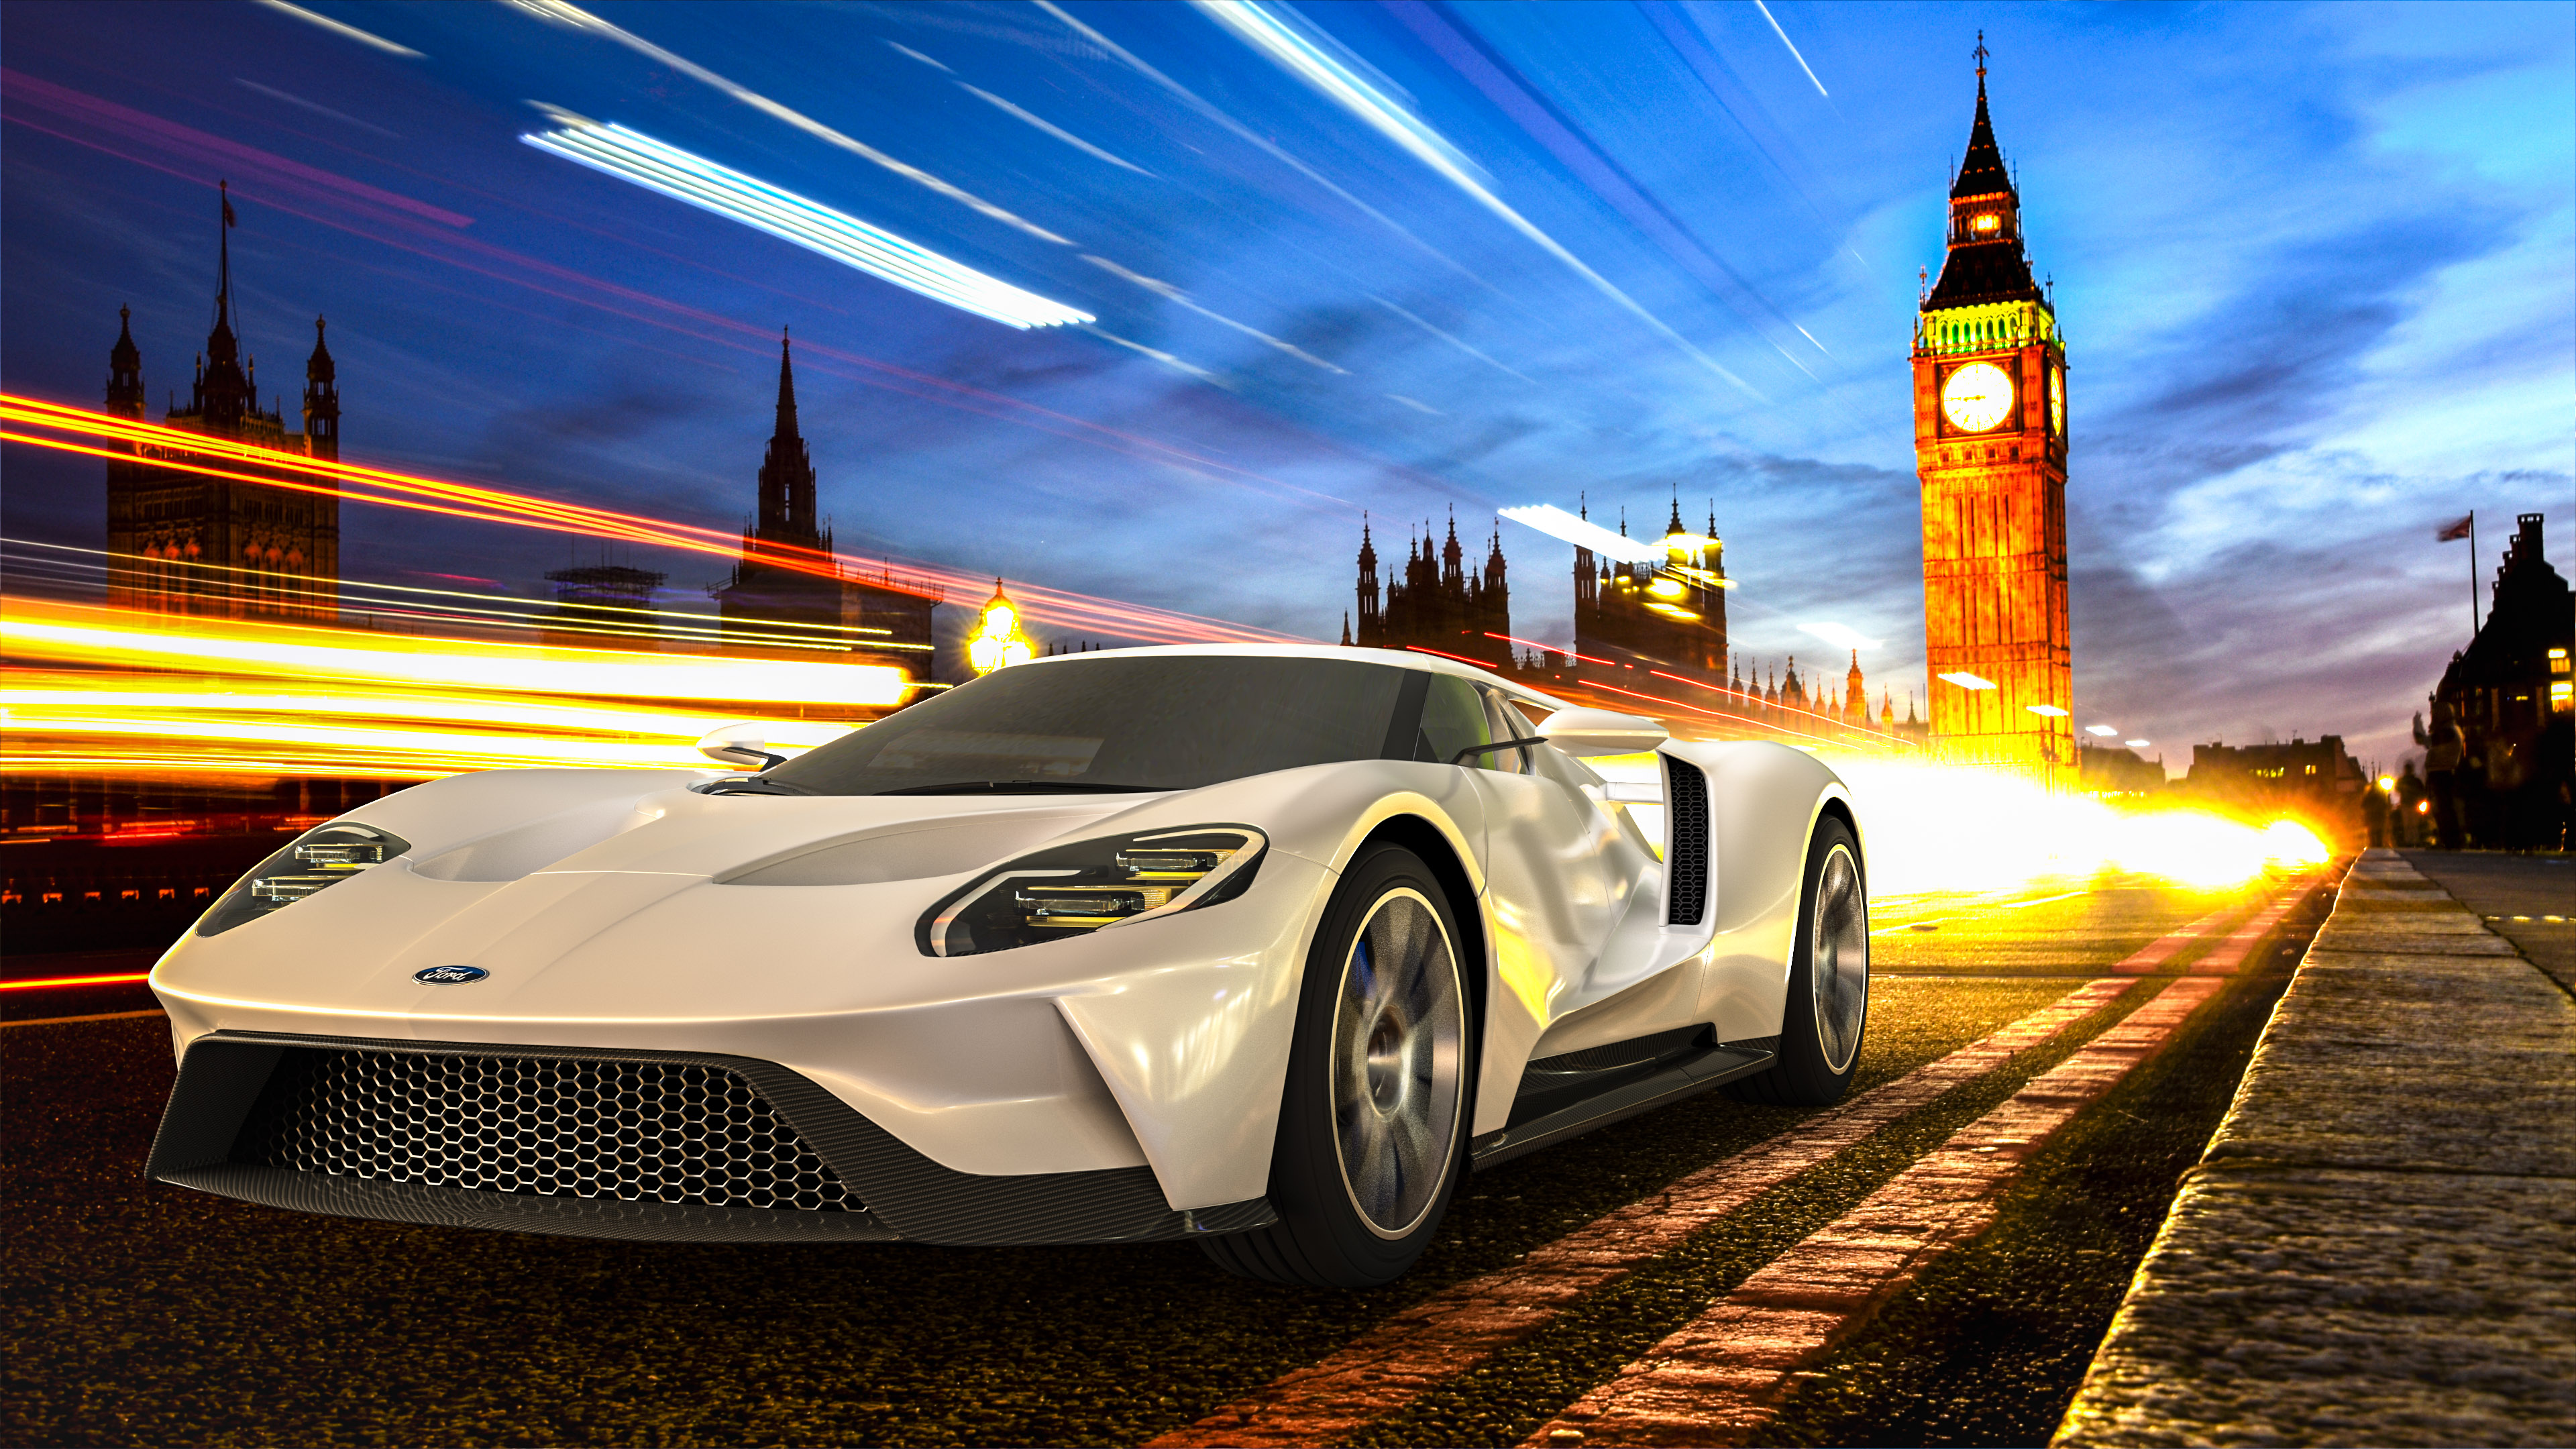 Explore the epitome of coolness with the cool car wallpaper, showcasing the Ford GT supercar in London, a fusion of power and sophistication, available for download.